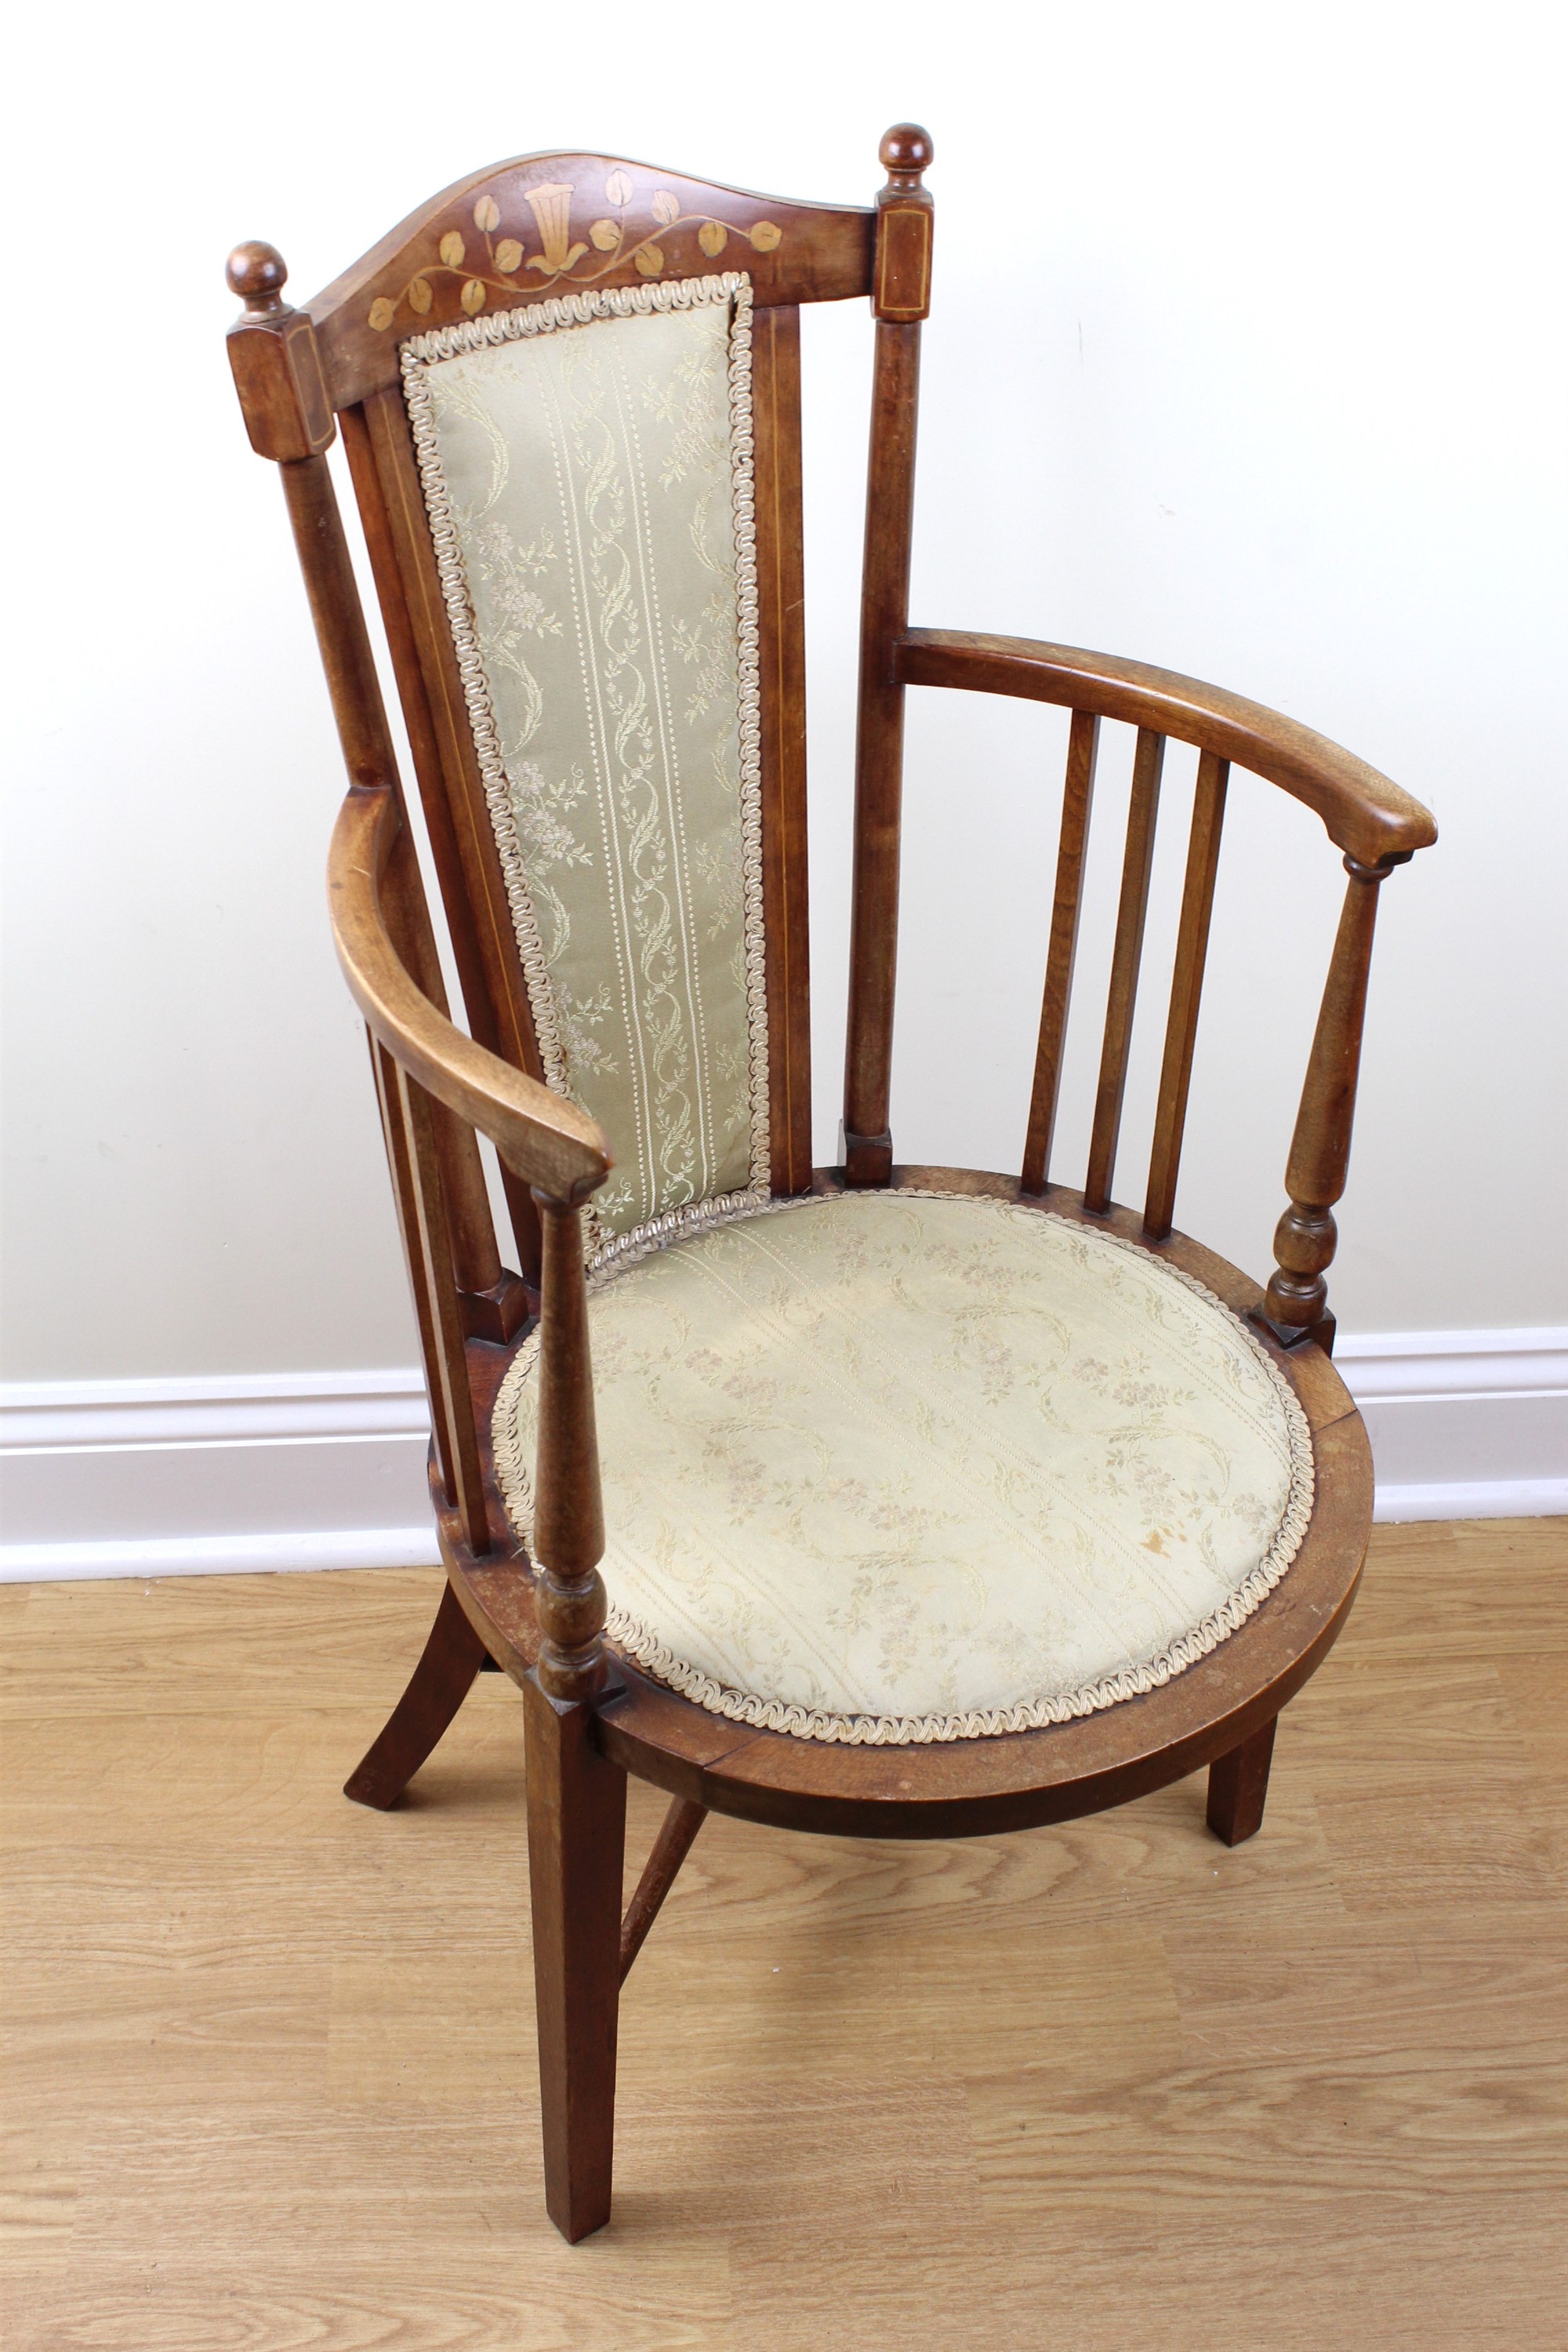 An early 20th Century Arts and Crafts influenced inlaid mahogany tub armchair, 50 cm x 99 cm